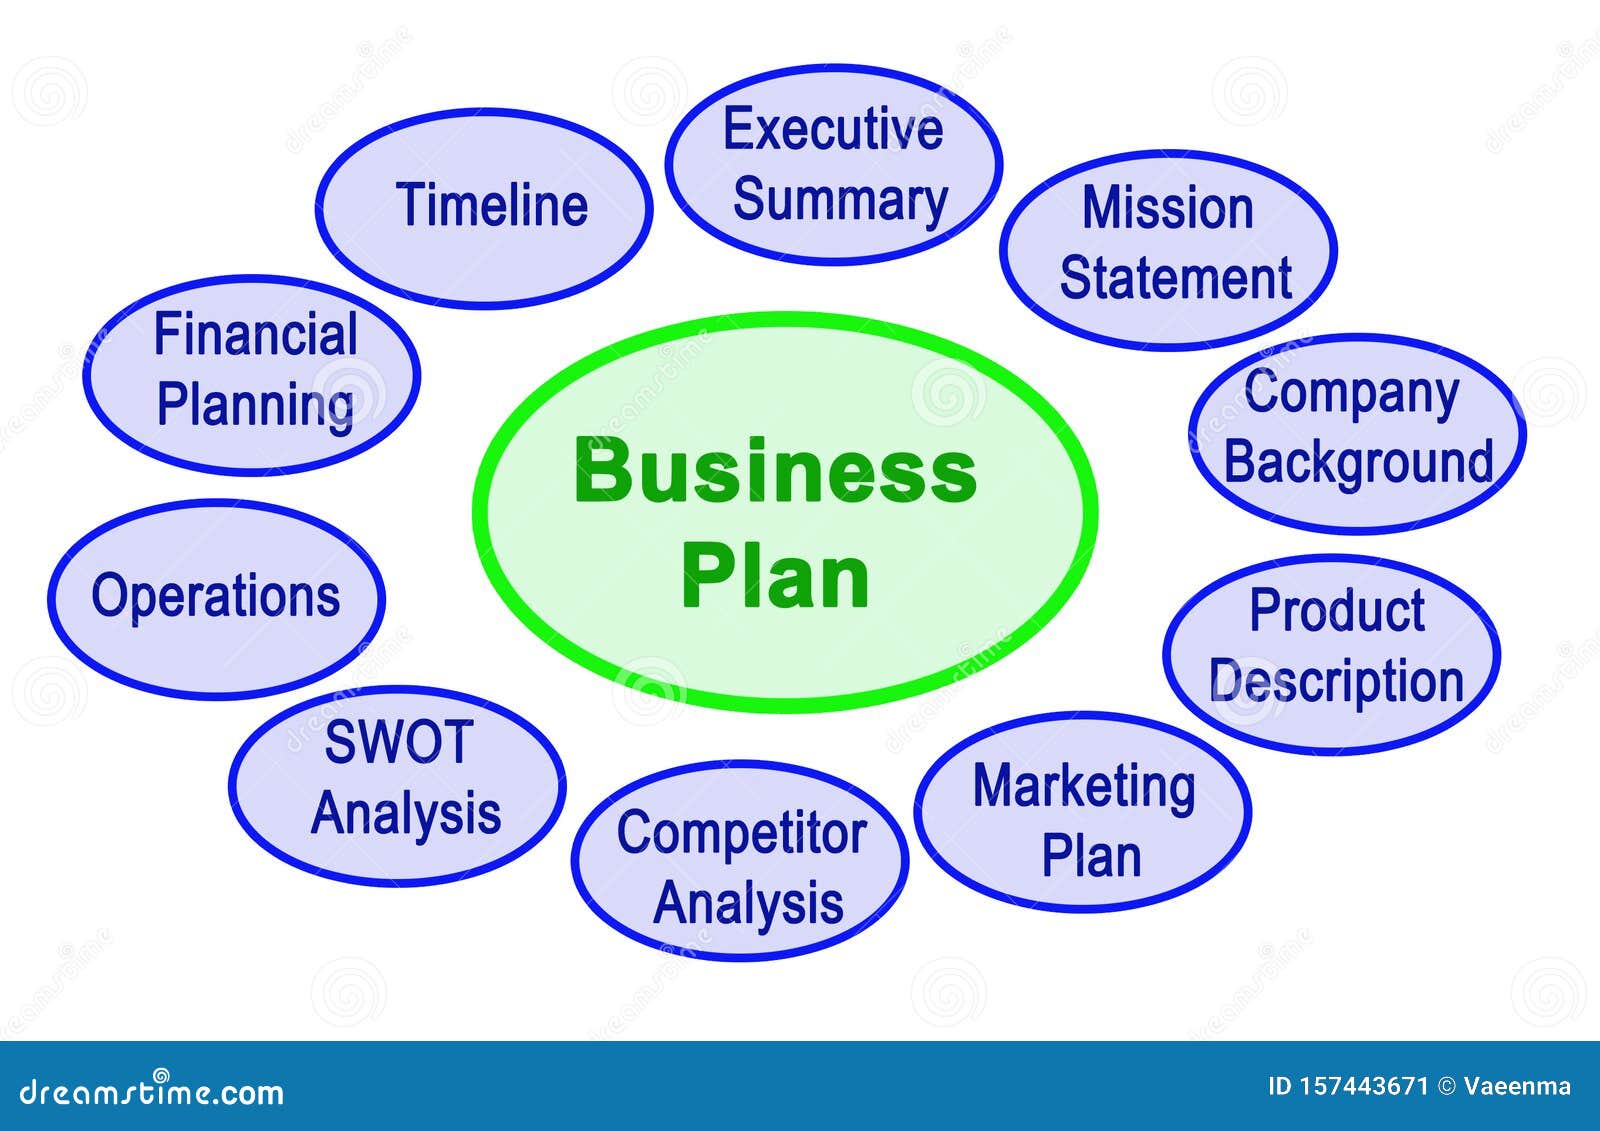 important parts of a business plan